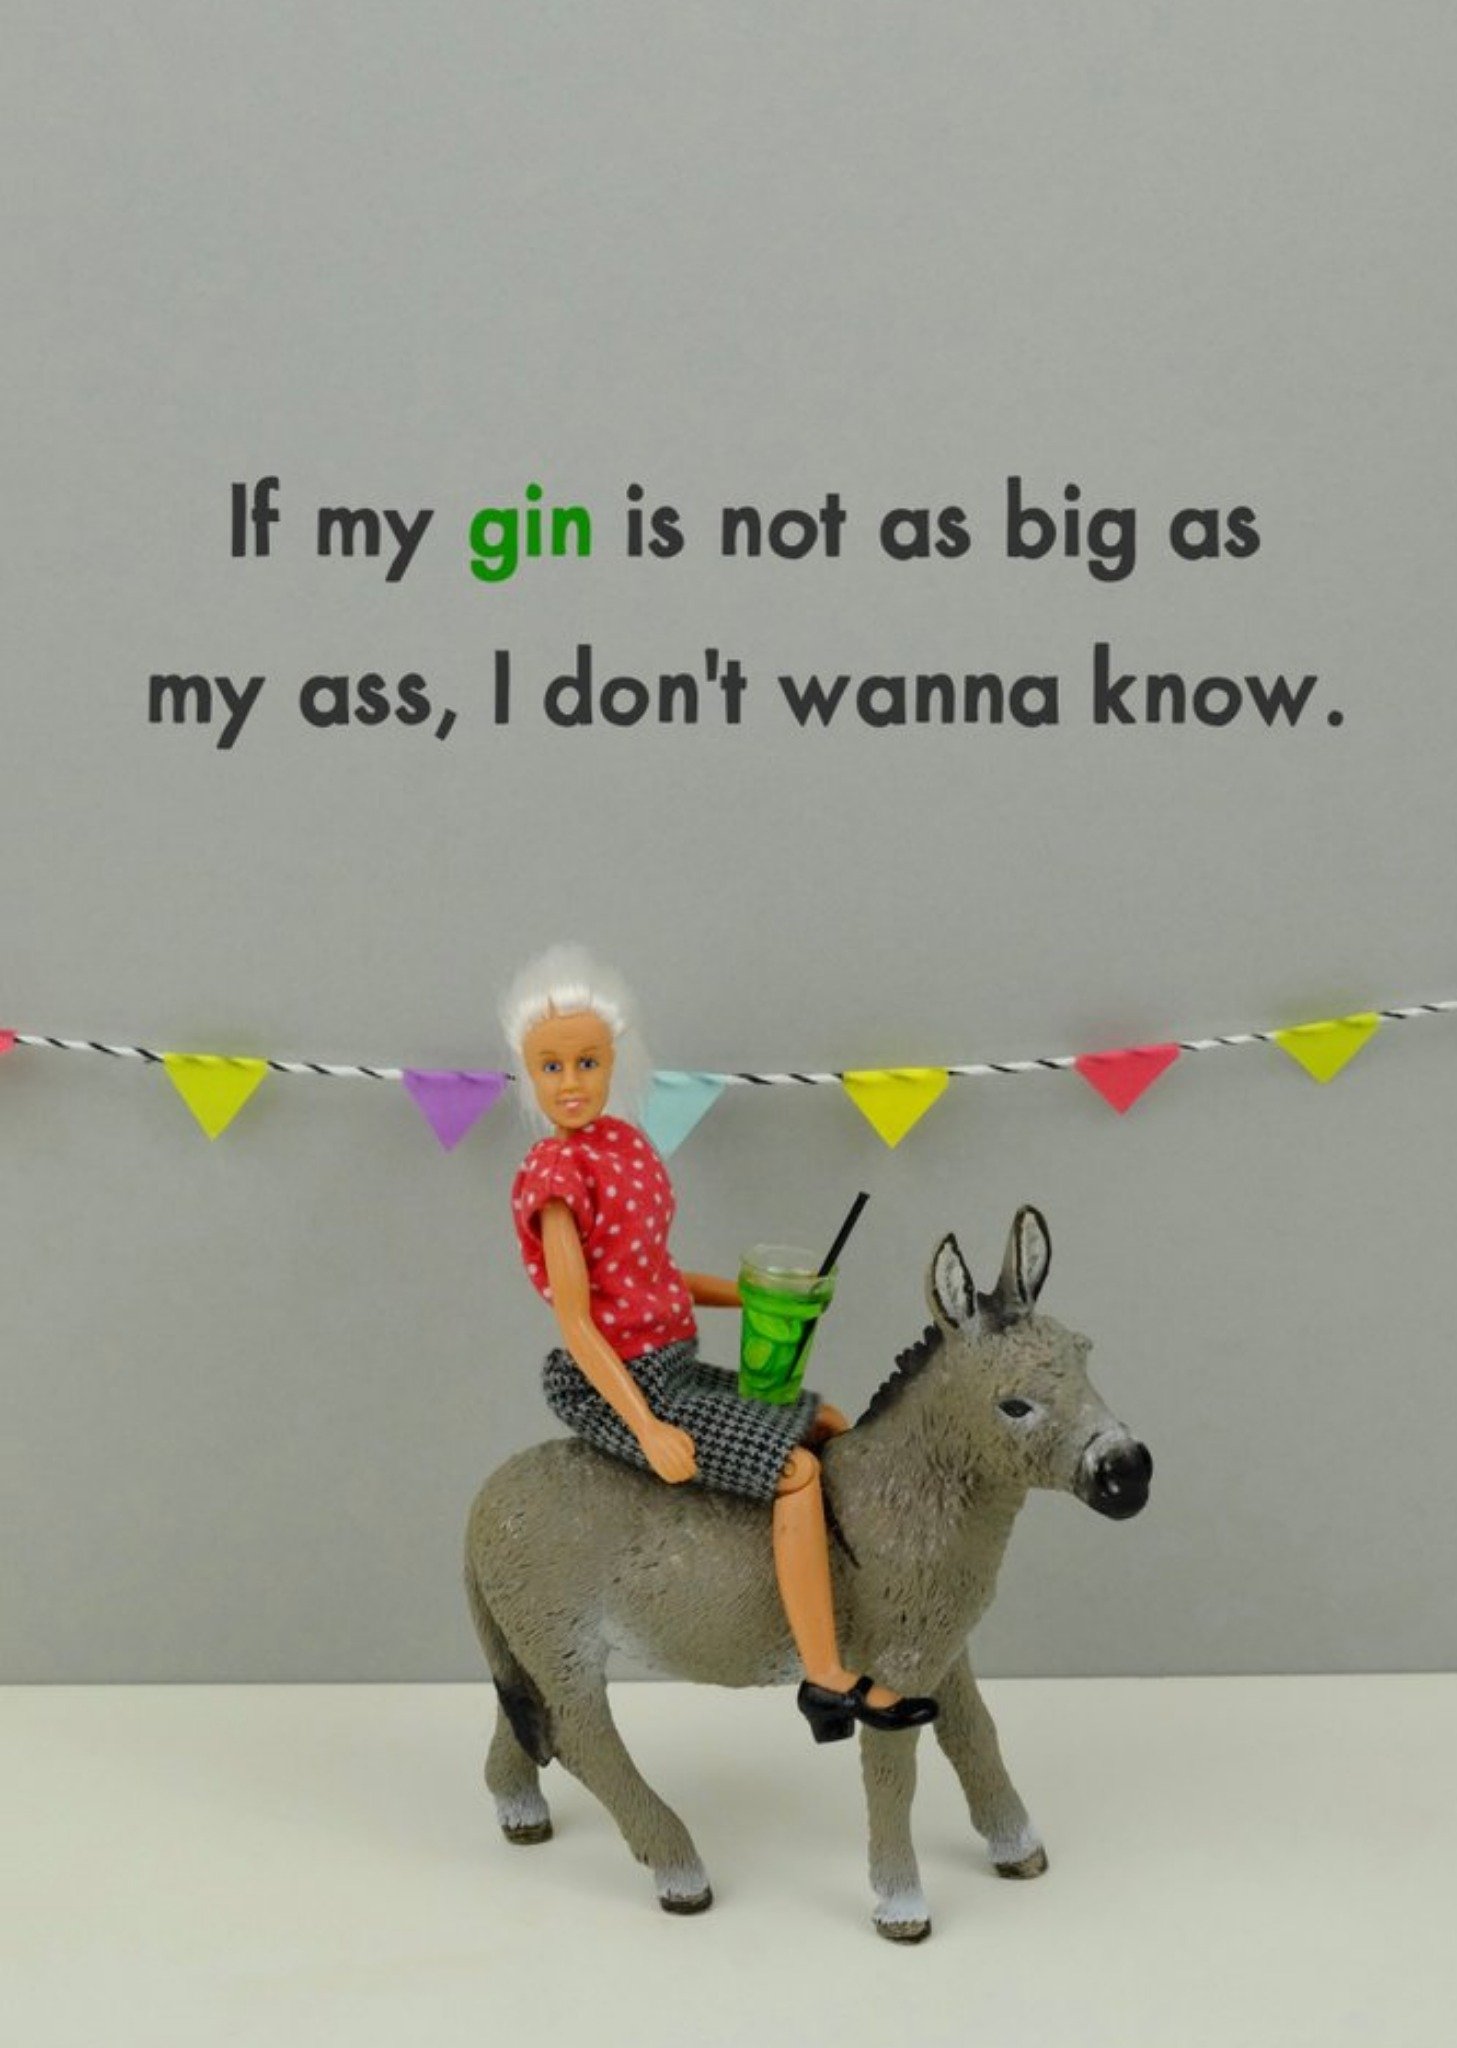 Friends Bold And Bright Adult Funny Ass Photo Image Gin Birthdays Card , Large